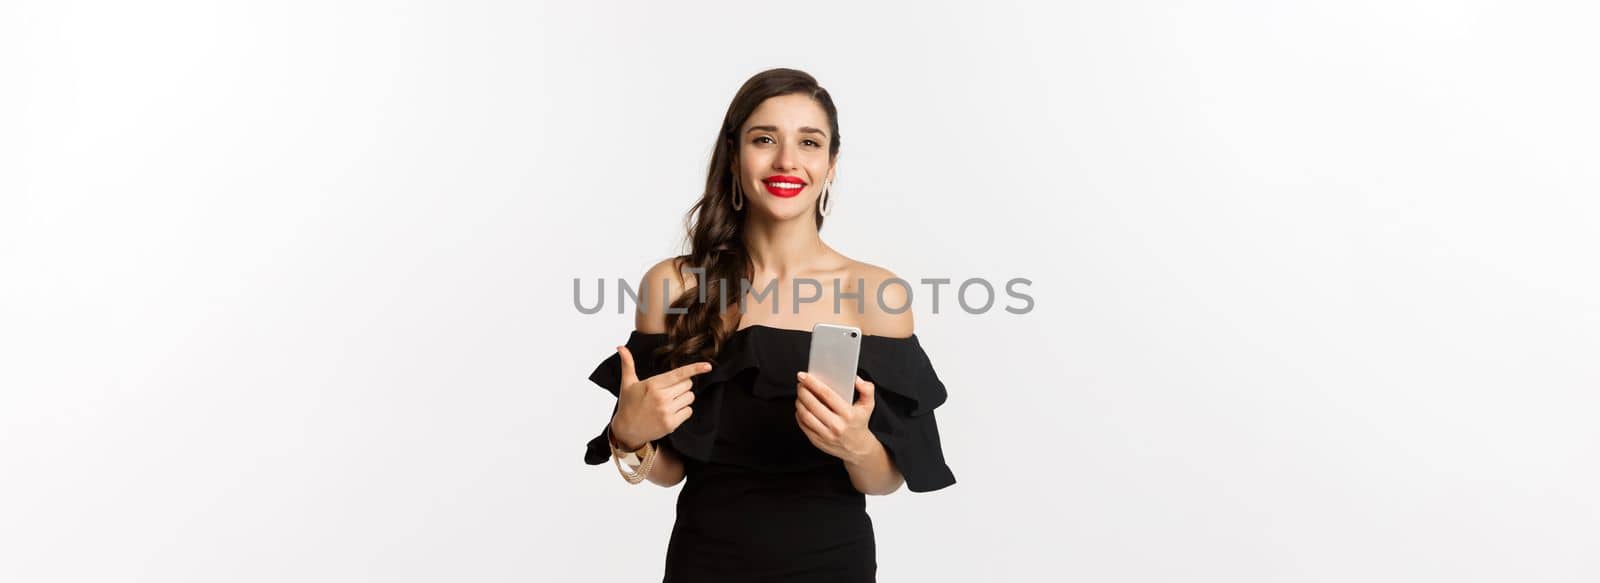 Online shopping concept. Stylish woman in black dress, wearing makeup, pointing finger at mobile phone with satisfied smile, standing over white background.